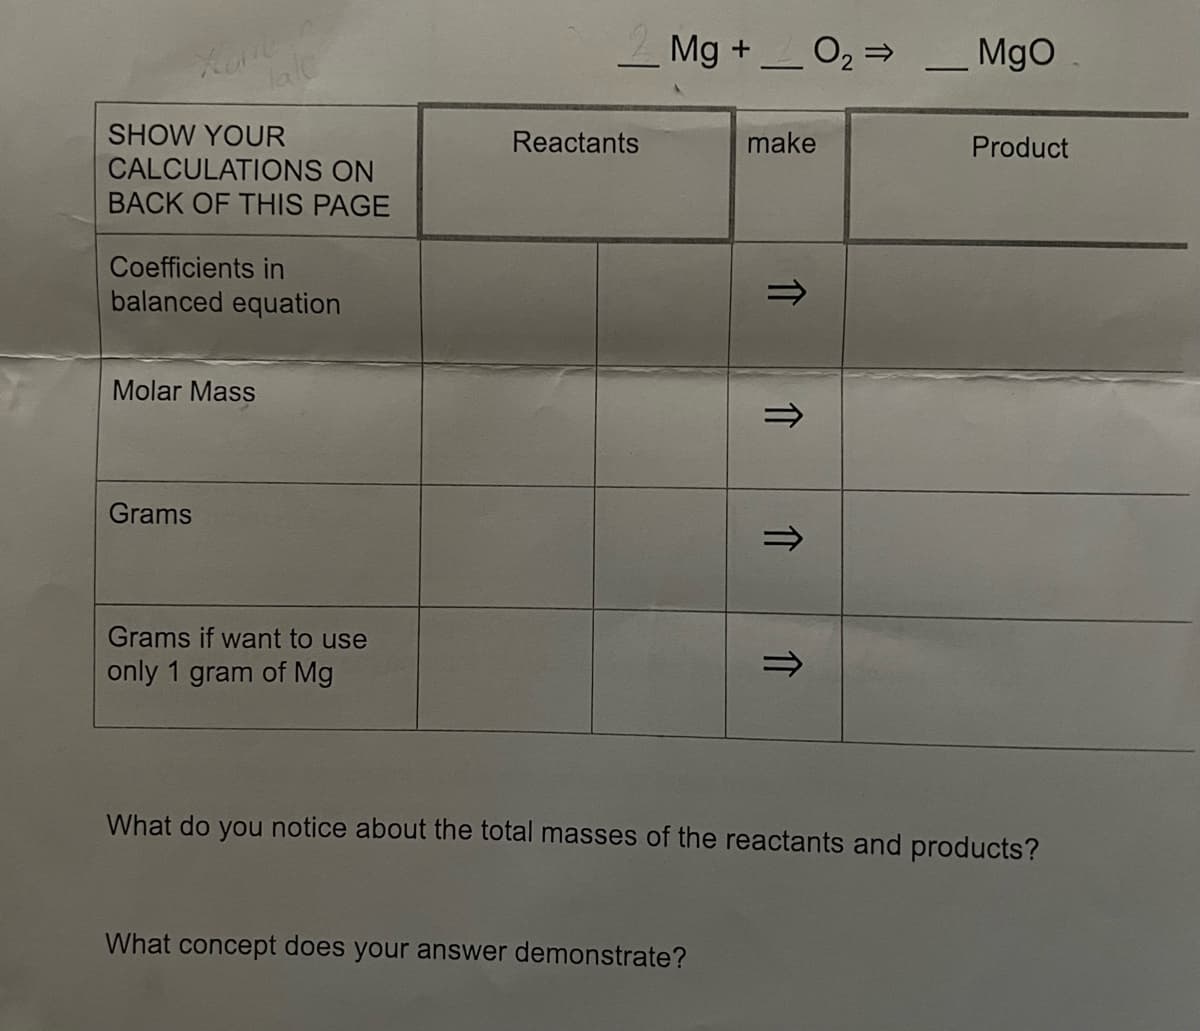 Mg + O₂ ⇒ _ MgO
make
Product
Reactants
lale
SHOW YOUR
CALCULATIONS ON
BACK OF THIS PAGE
Coefficients in
balanced equation
Molar Mass
Grams
Grams if want to use
only 1 gram of Mg
What do you notice about the total masses of the reactants and products?
What concept does your answer demonstrate?
↑
11
介
11